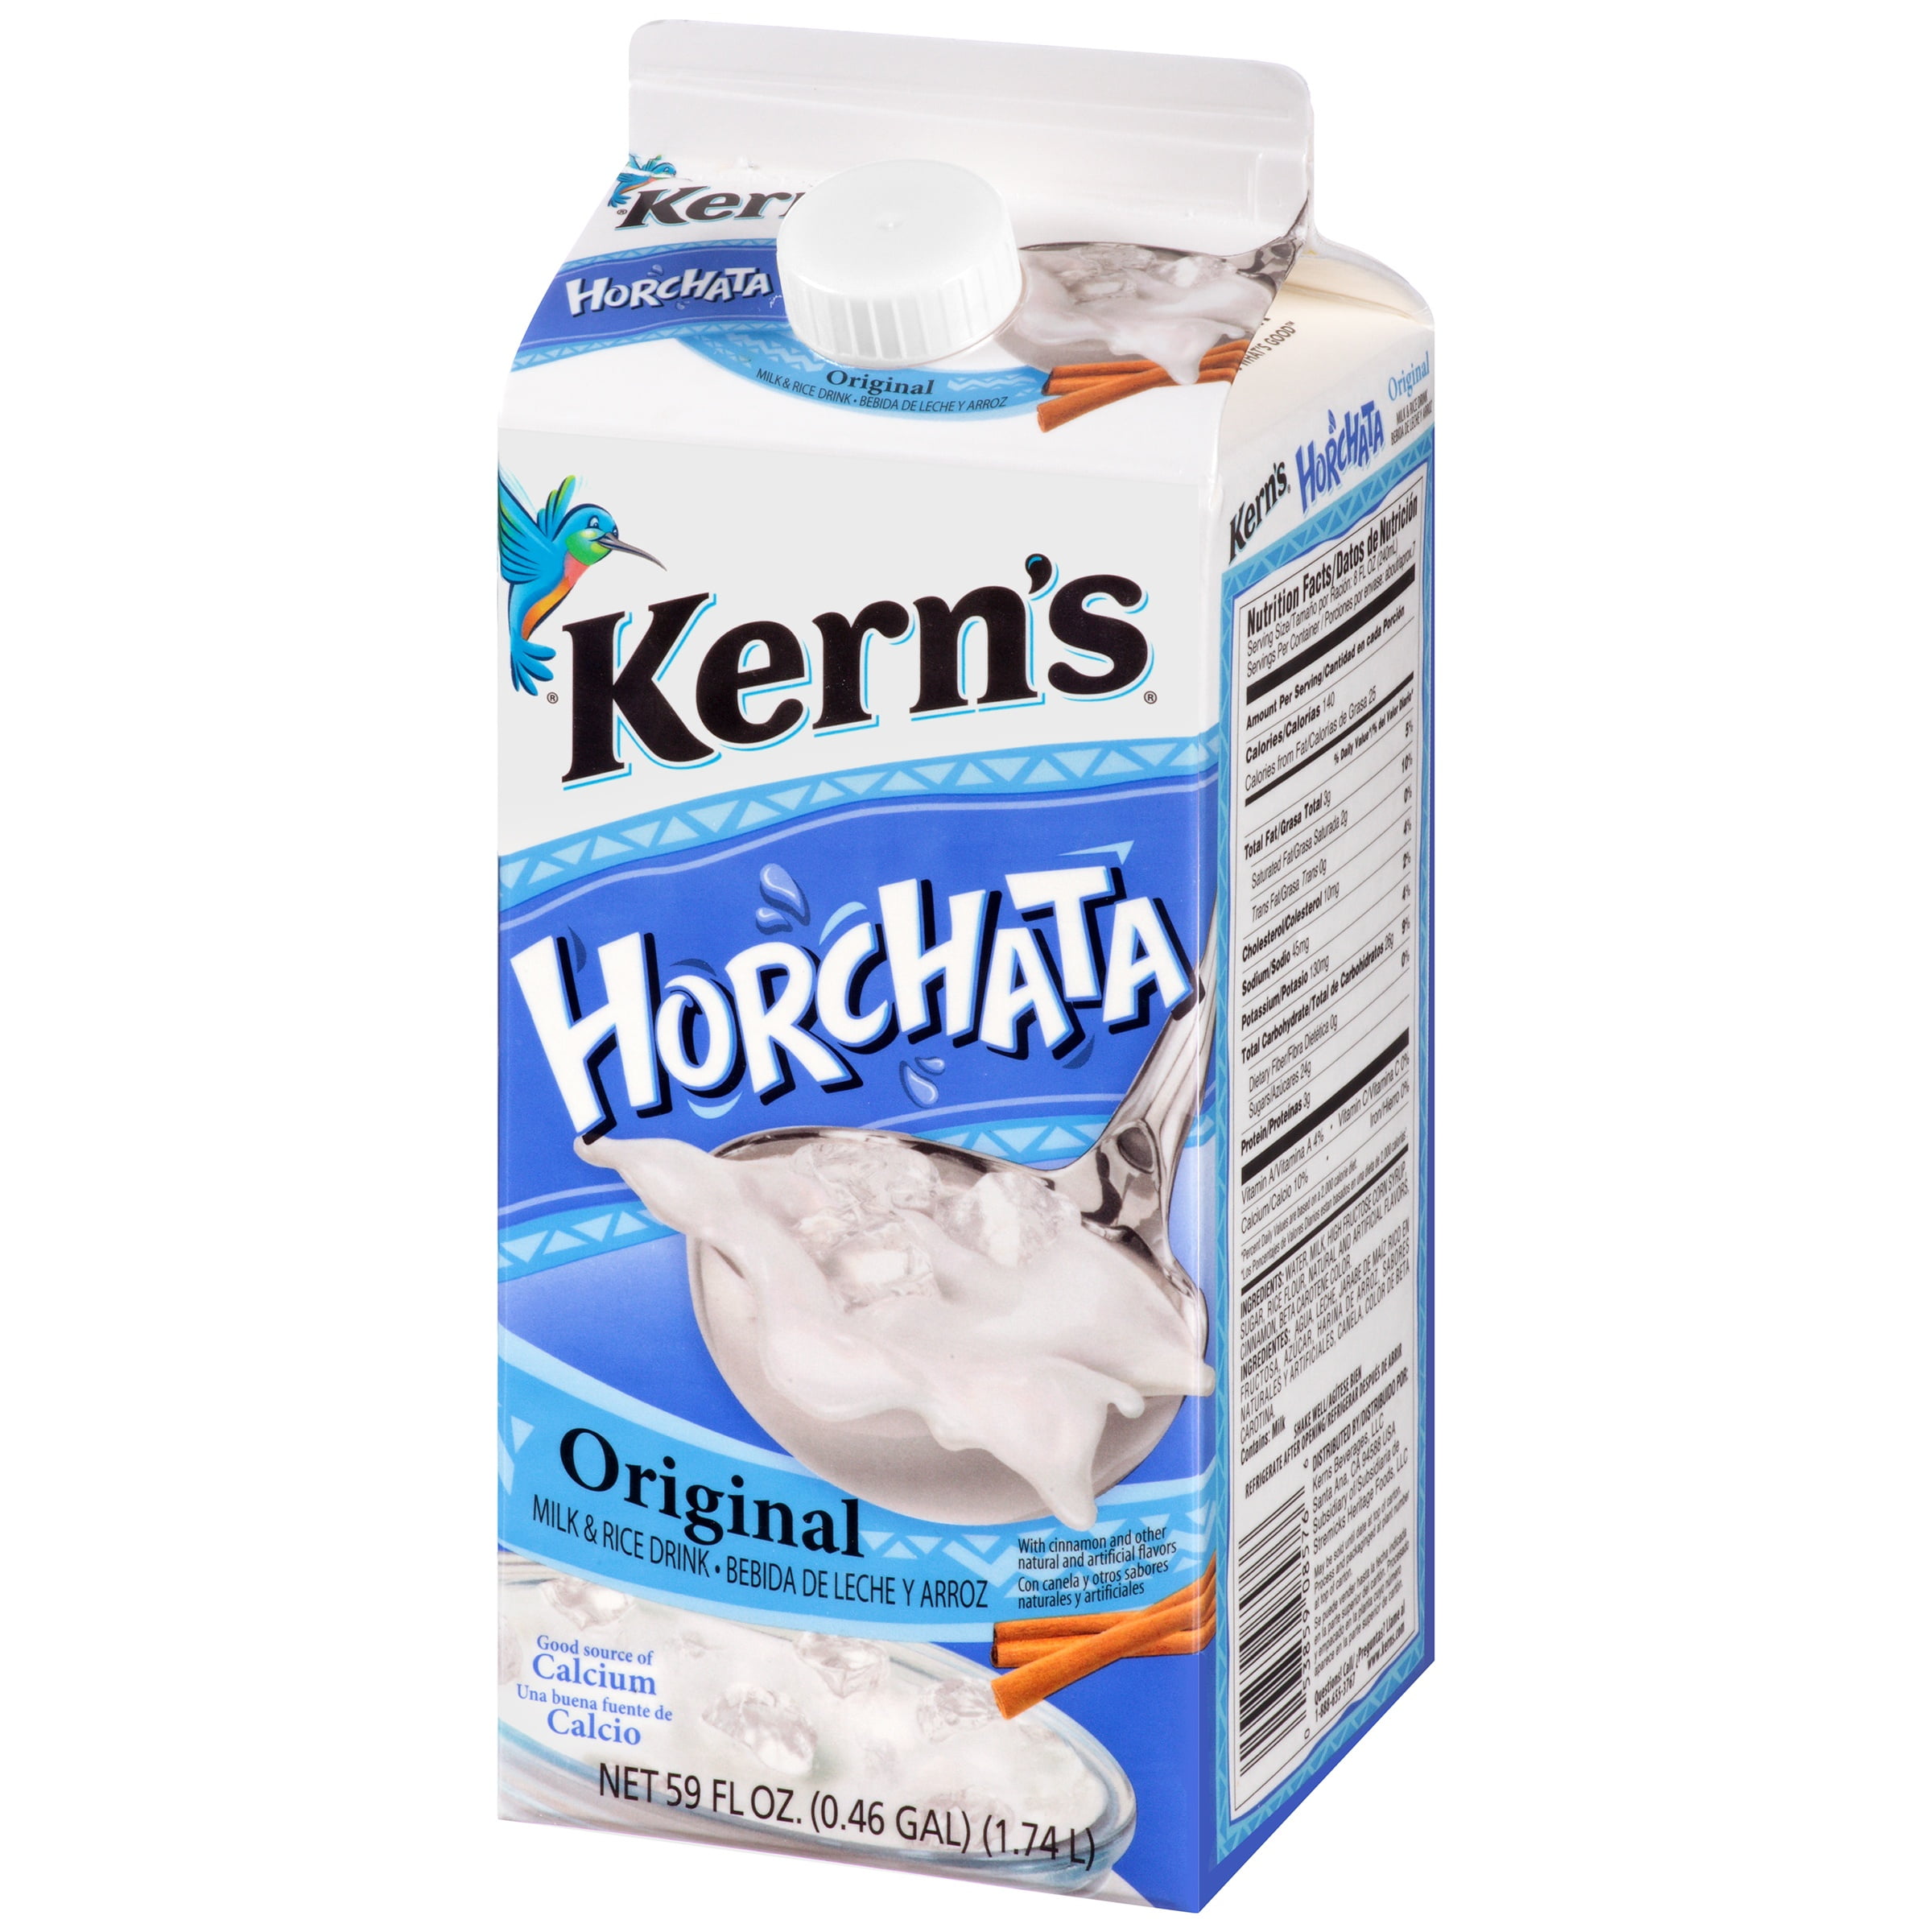 Horchata Soda Soda flavored like the famous rice milk drink